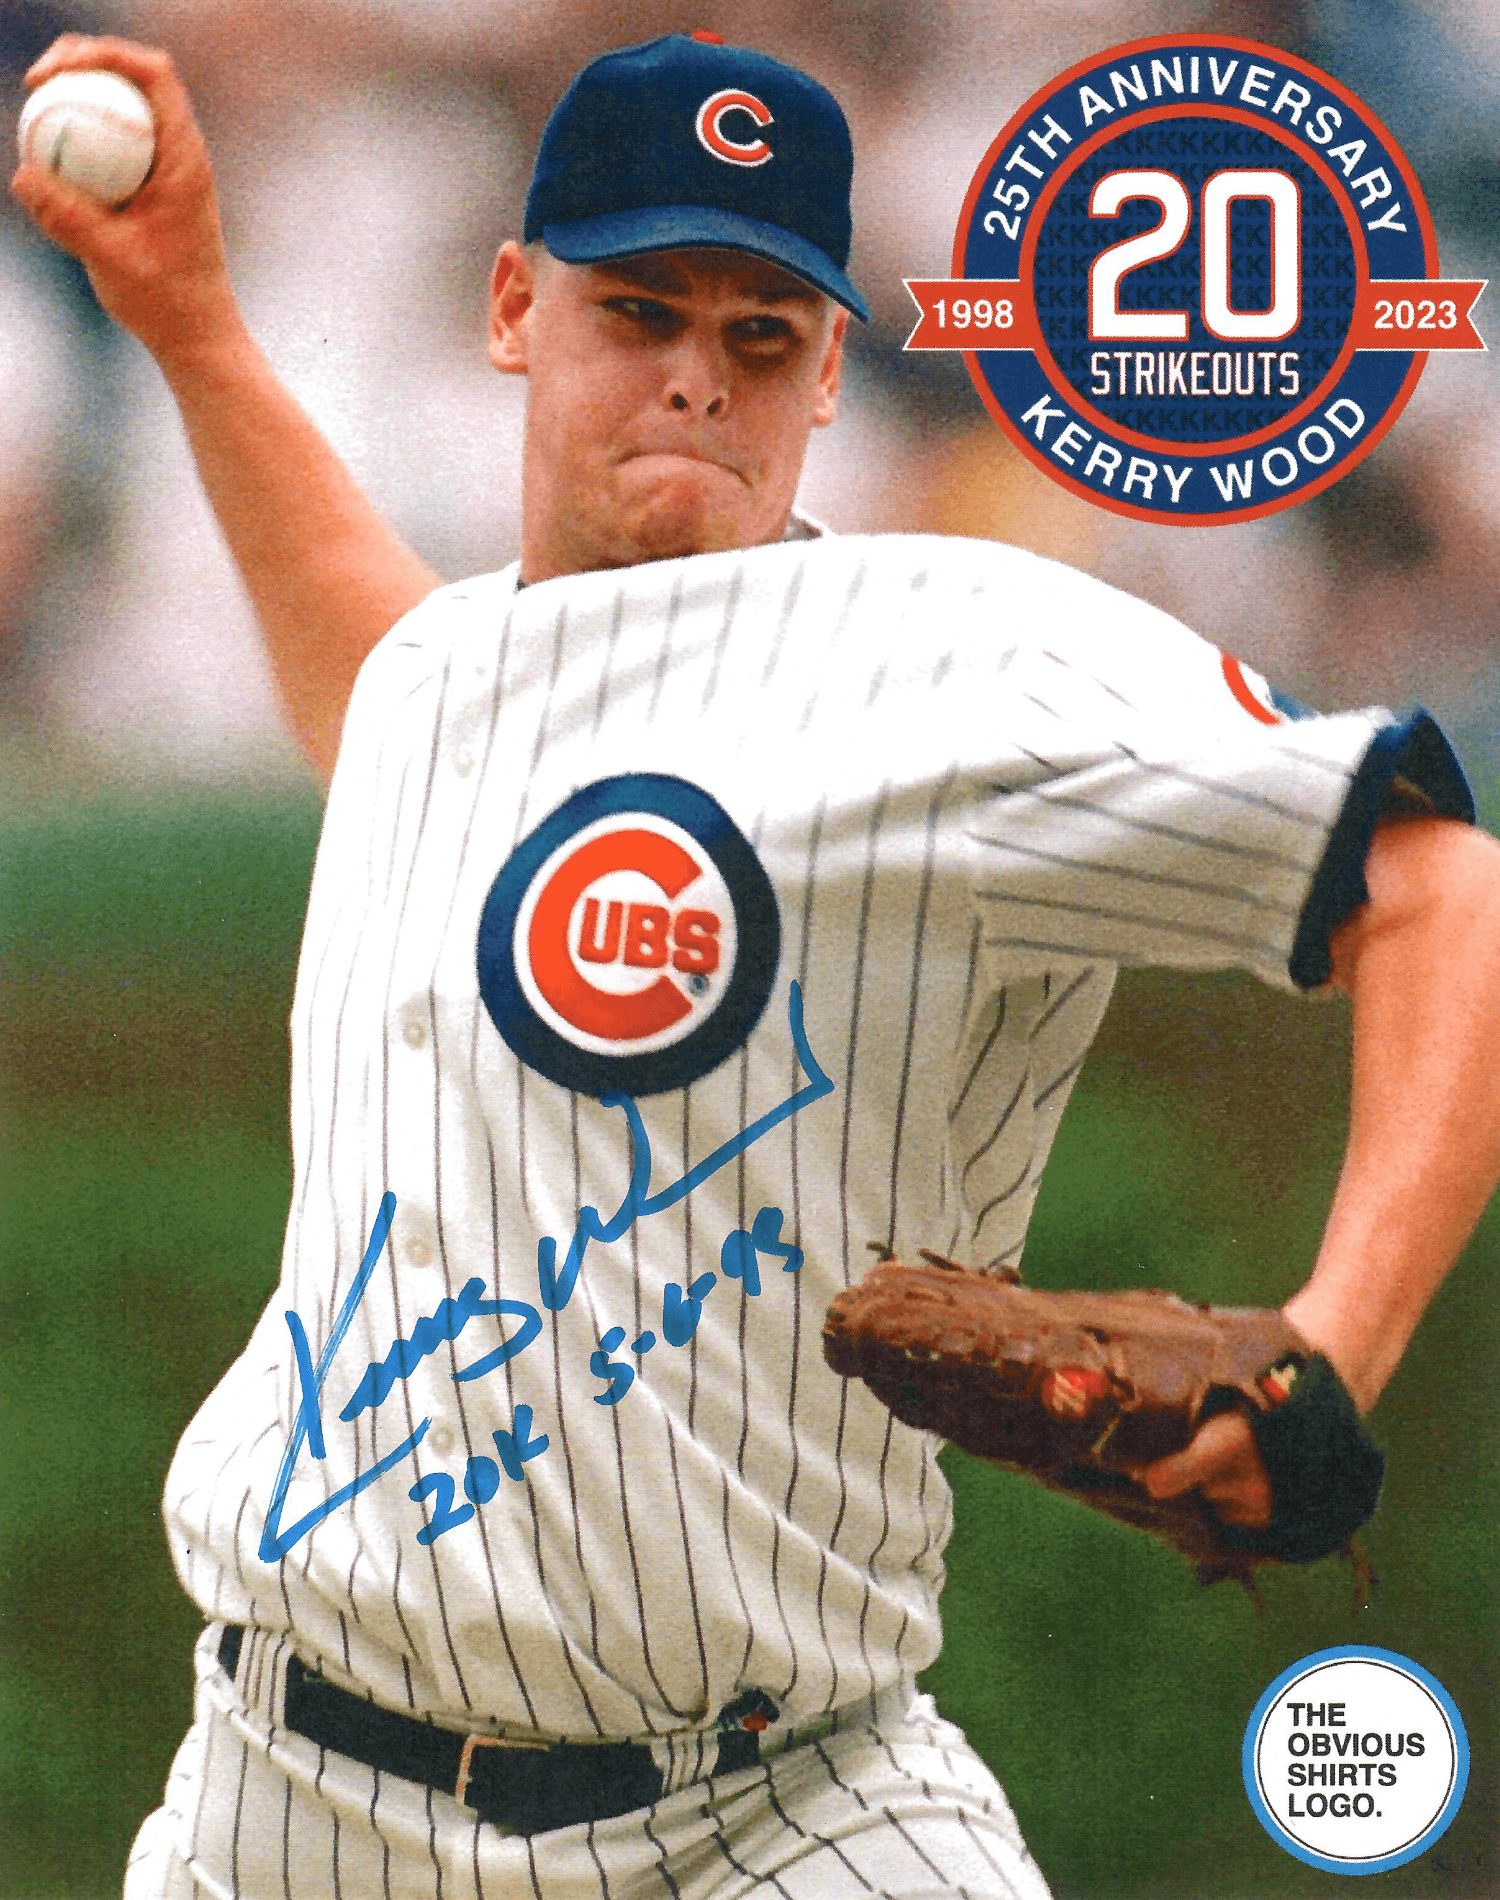 KERRY WOOD 25TH ANNIVERSARY SIGNED 20 STRIKEOUT 8x10 PHOTO